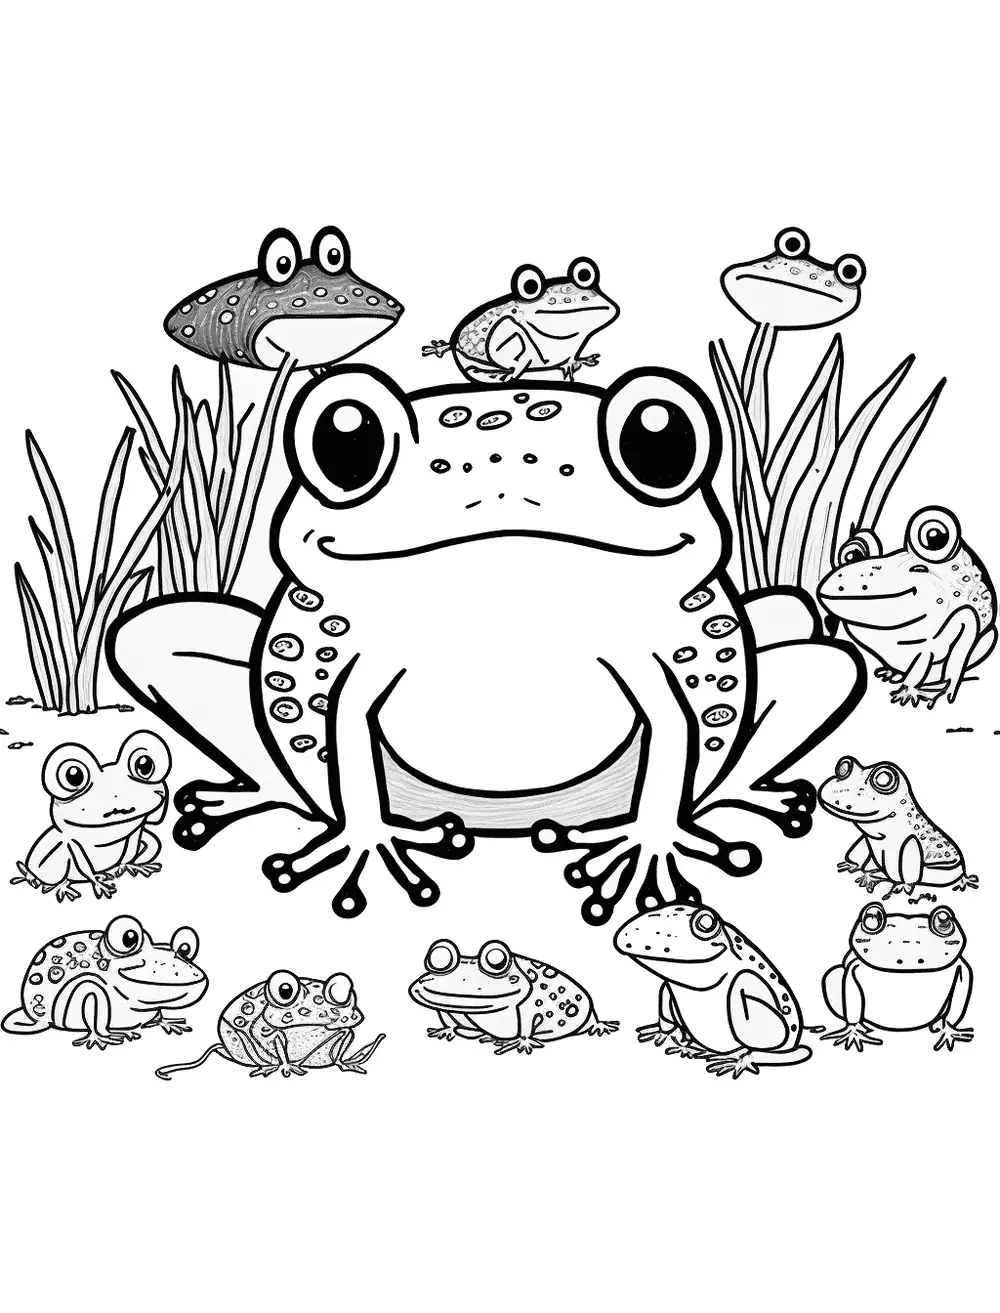 Frog and Friends Coloring Page - A group of weird-looking frogs.